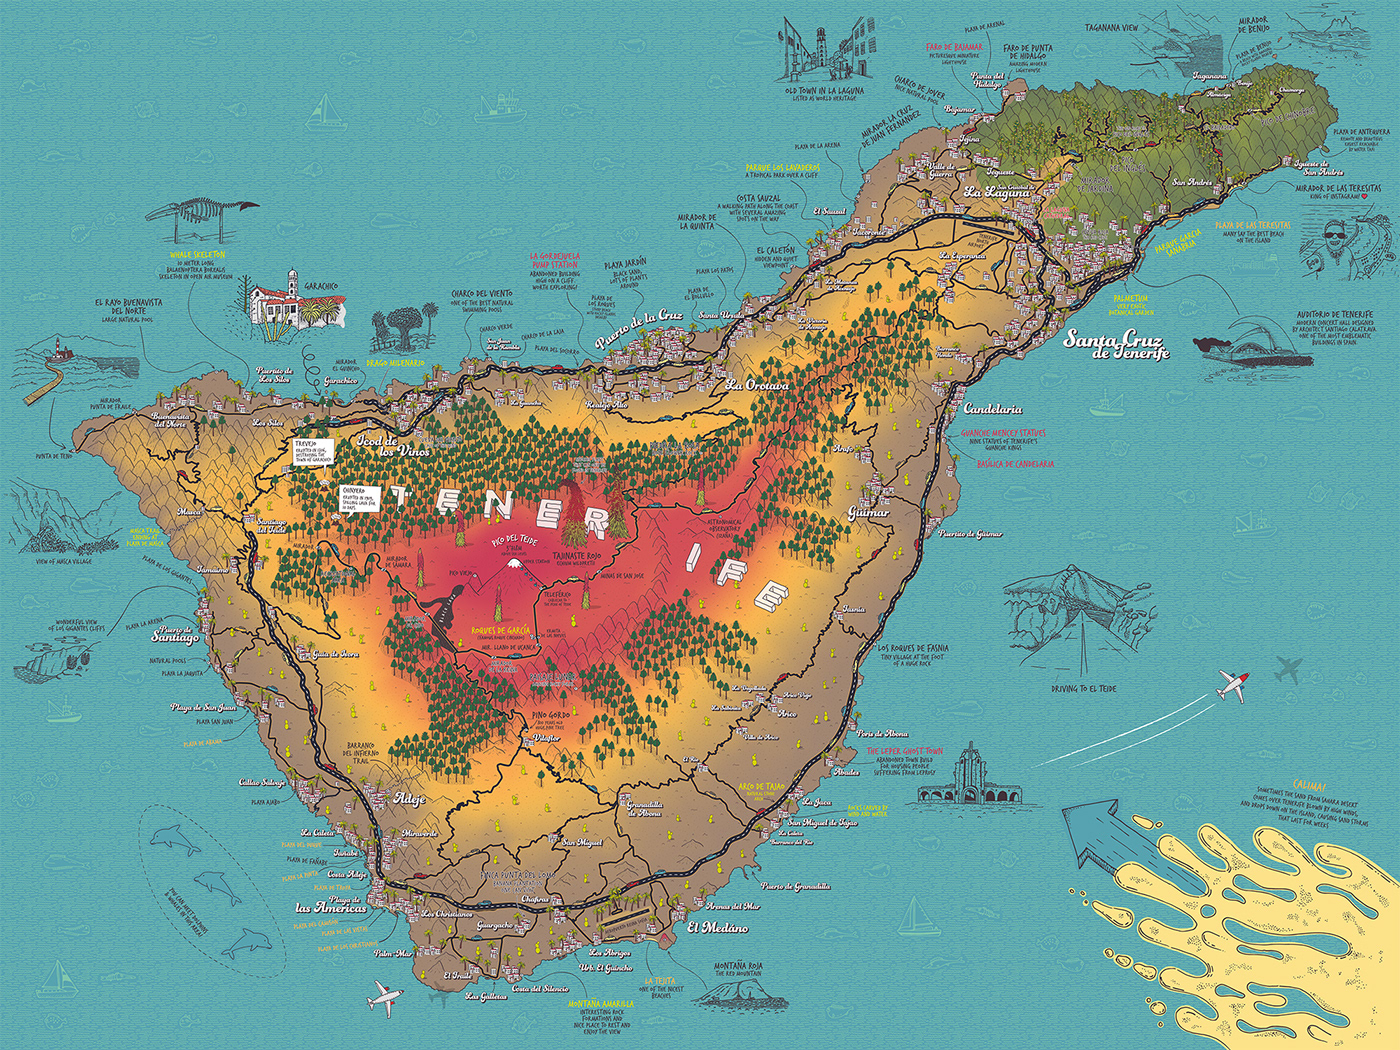 Tenerife Holiday Map for Android on Behance